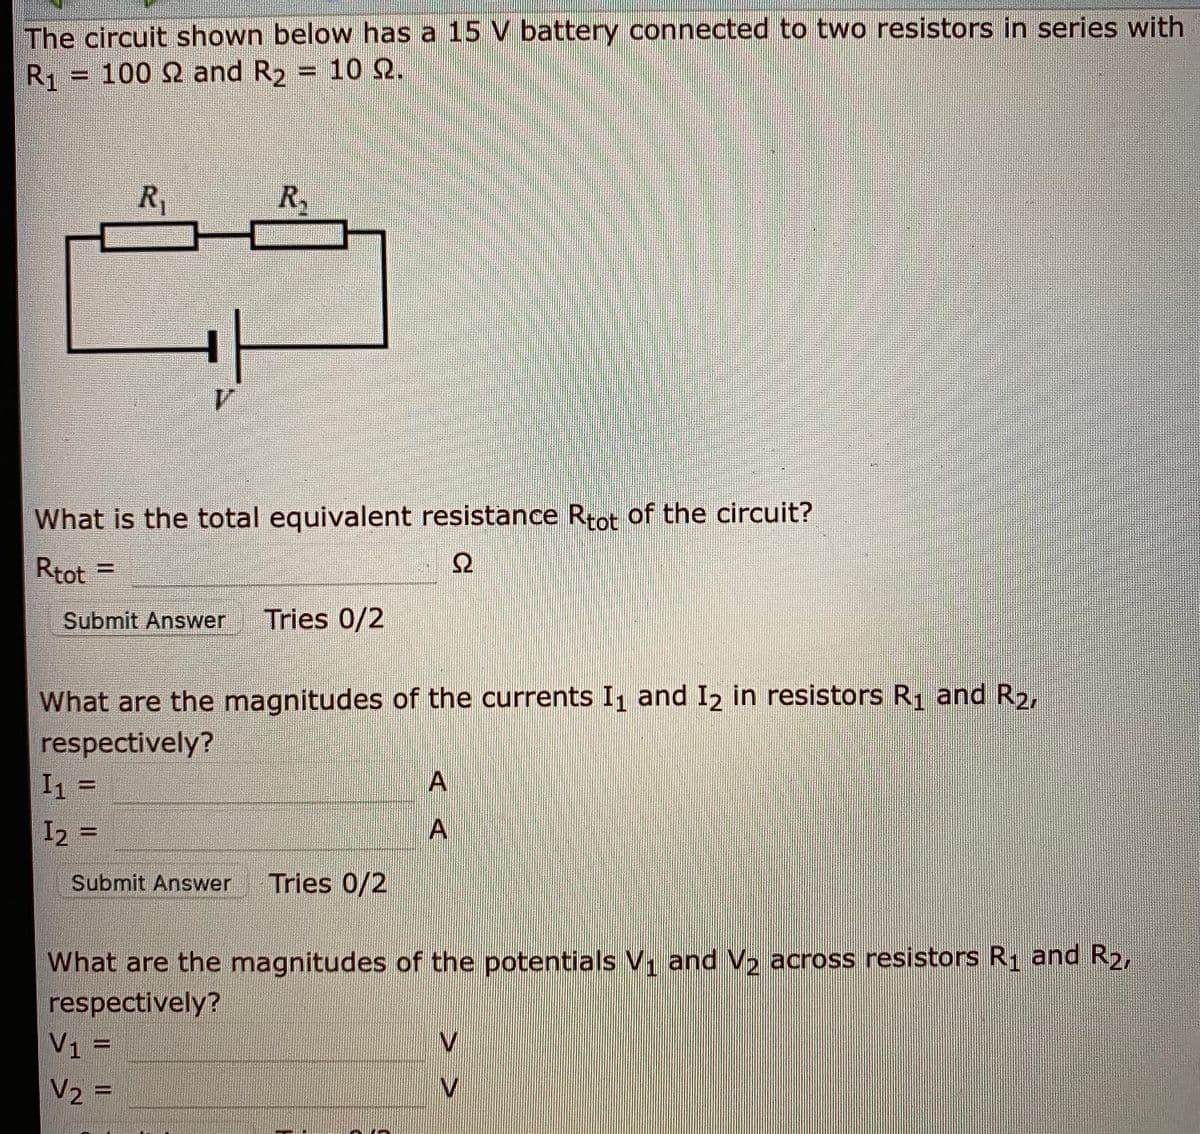 The circuit shown below has a 15 V battery connected to two resistors in series with
R1 -
100 Ω and R, -10 Ω.
R1
Ry
What is the total equivalent resistance Rtot of the circuit?
Rtot =
Ω
Submit Answer
Tries 0/2
What are the magnitudes of the currents I1 and I2 in resistors R1 and R2,
respectively?
I1 =
I2 =
%3D
Submit Answer
Tries 0/2
What are the magnitudes of the potentials V, and V, across resistors R1 and R2,
respectively?
V1 =
V2 =
AA
> >
